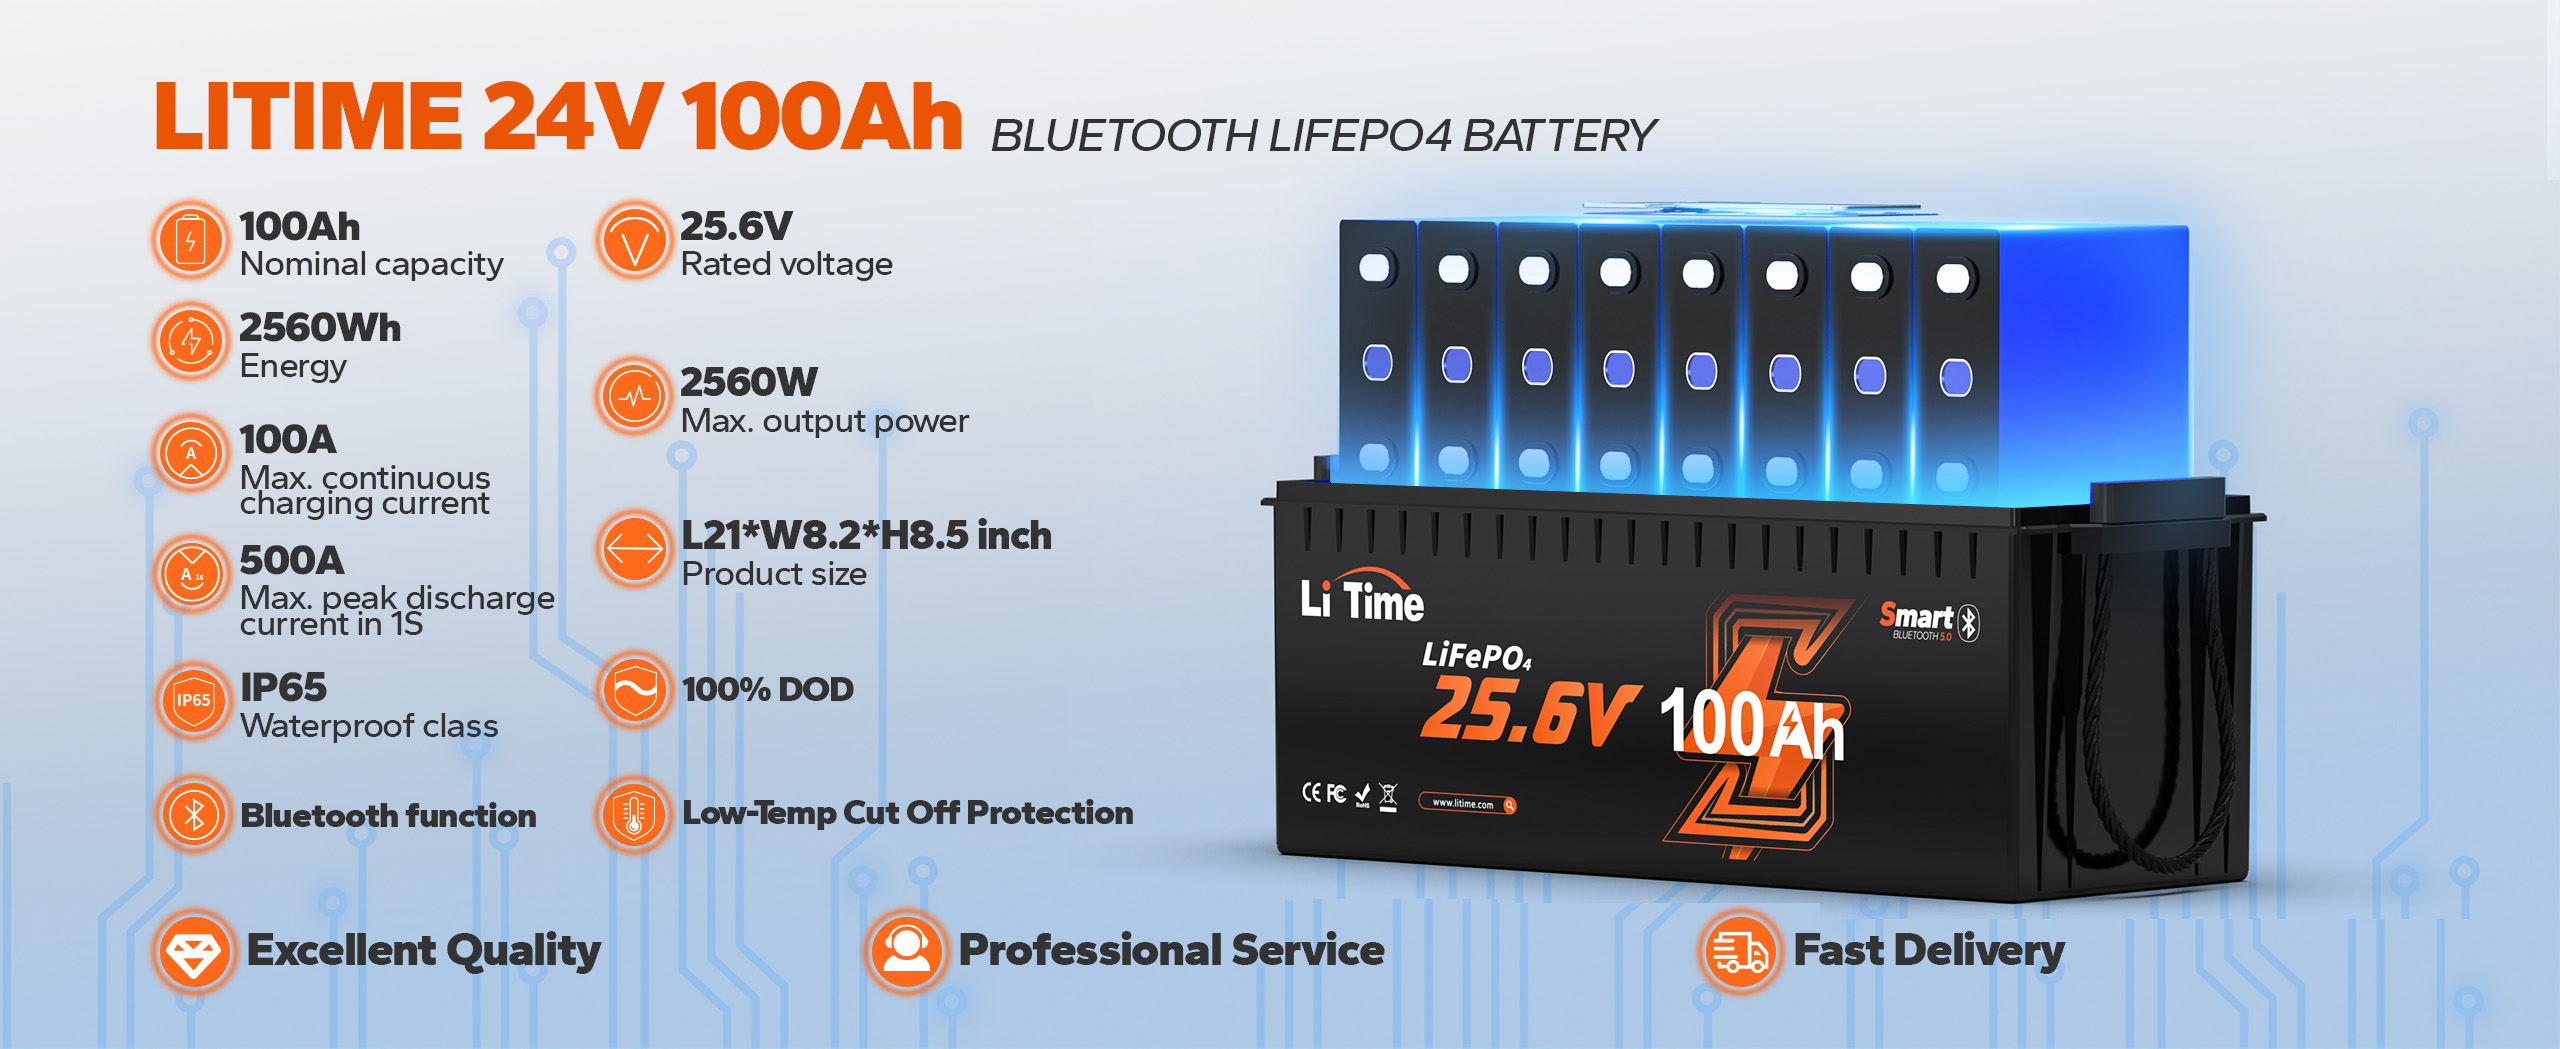 the specifications of LiTime 24V 100Ah LiFePO4 marine trolling motor battery